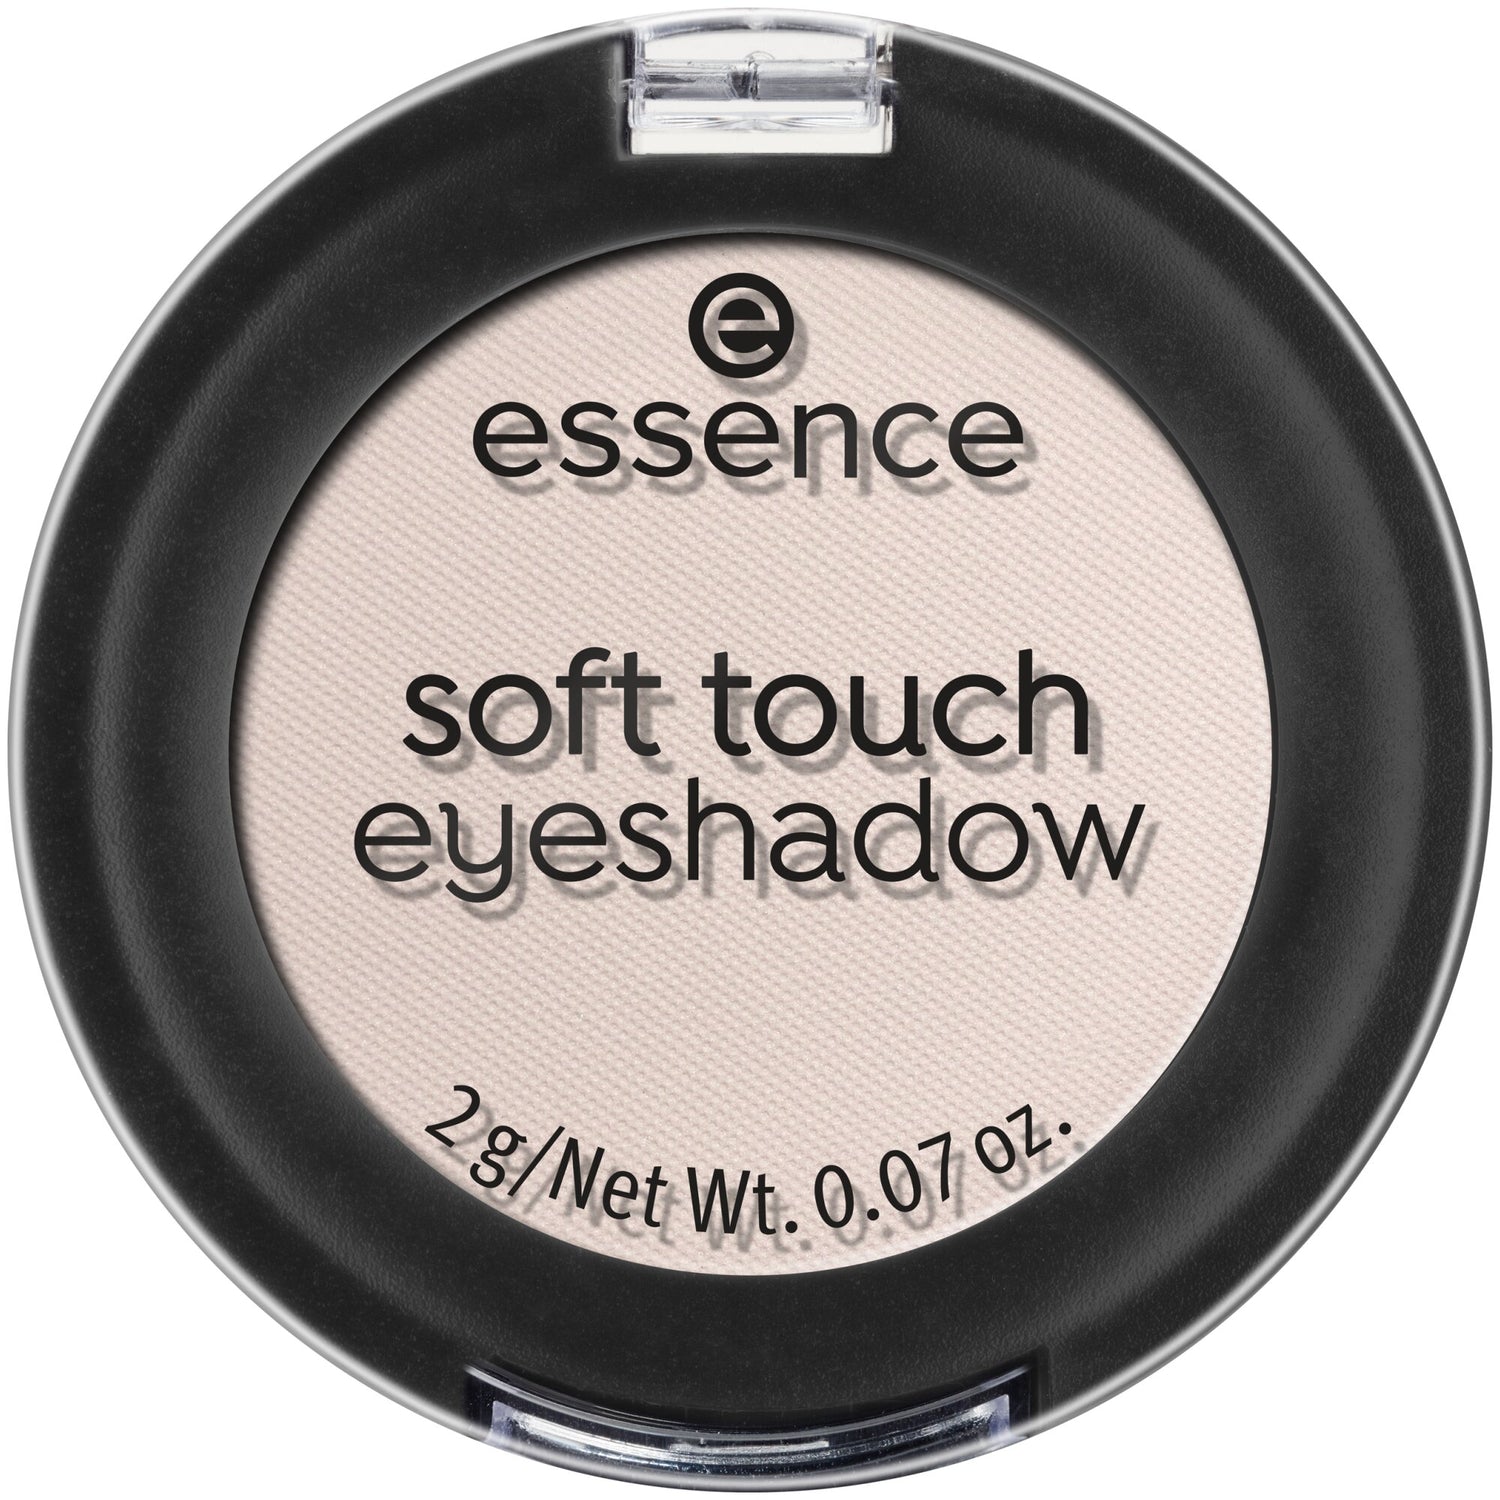 Essence Soft Touch Eyeshadow 2g The One Closed